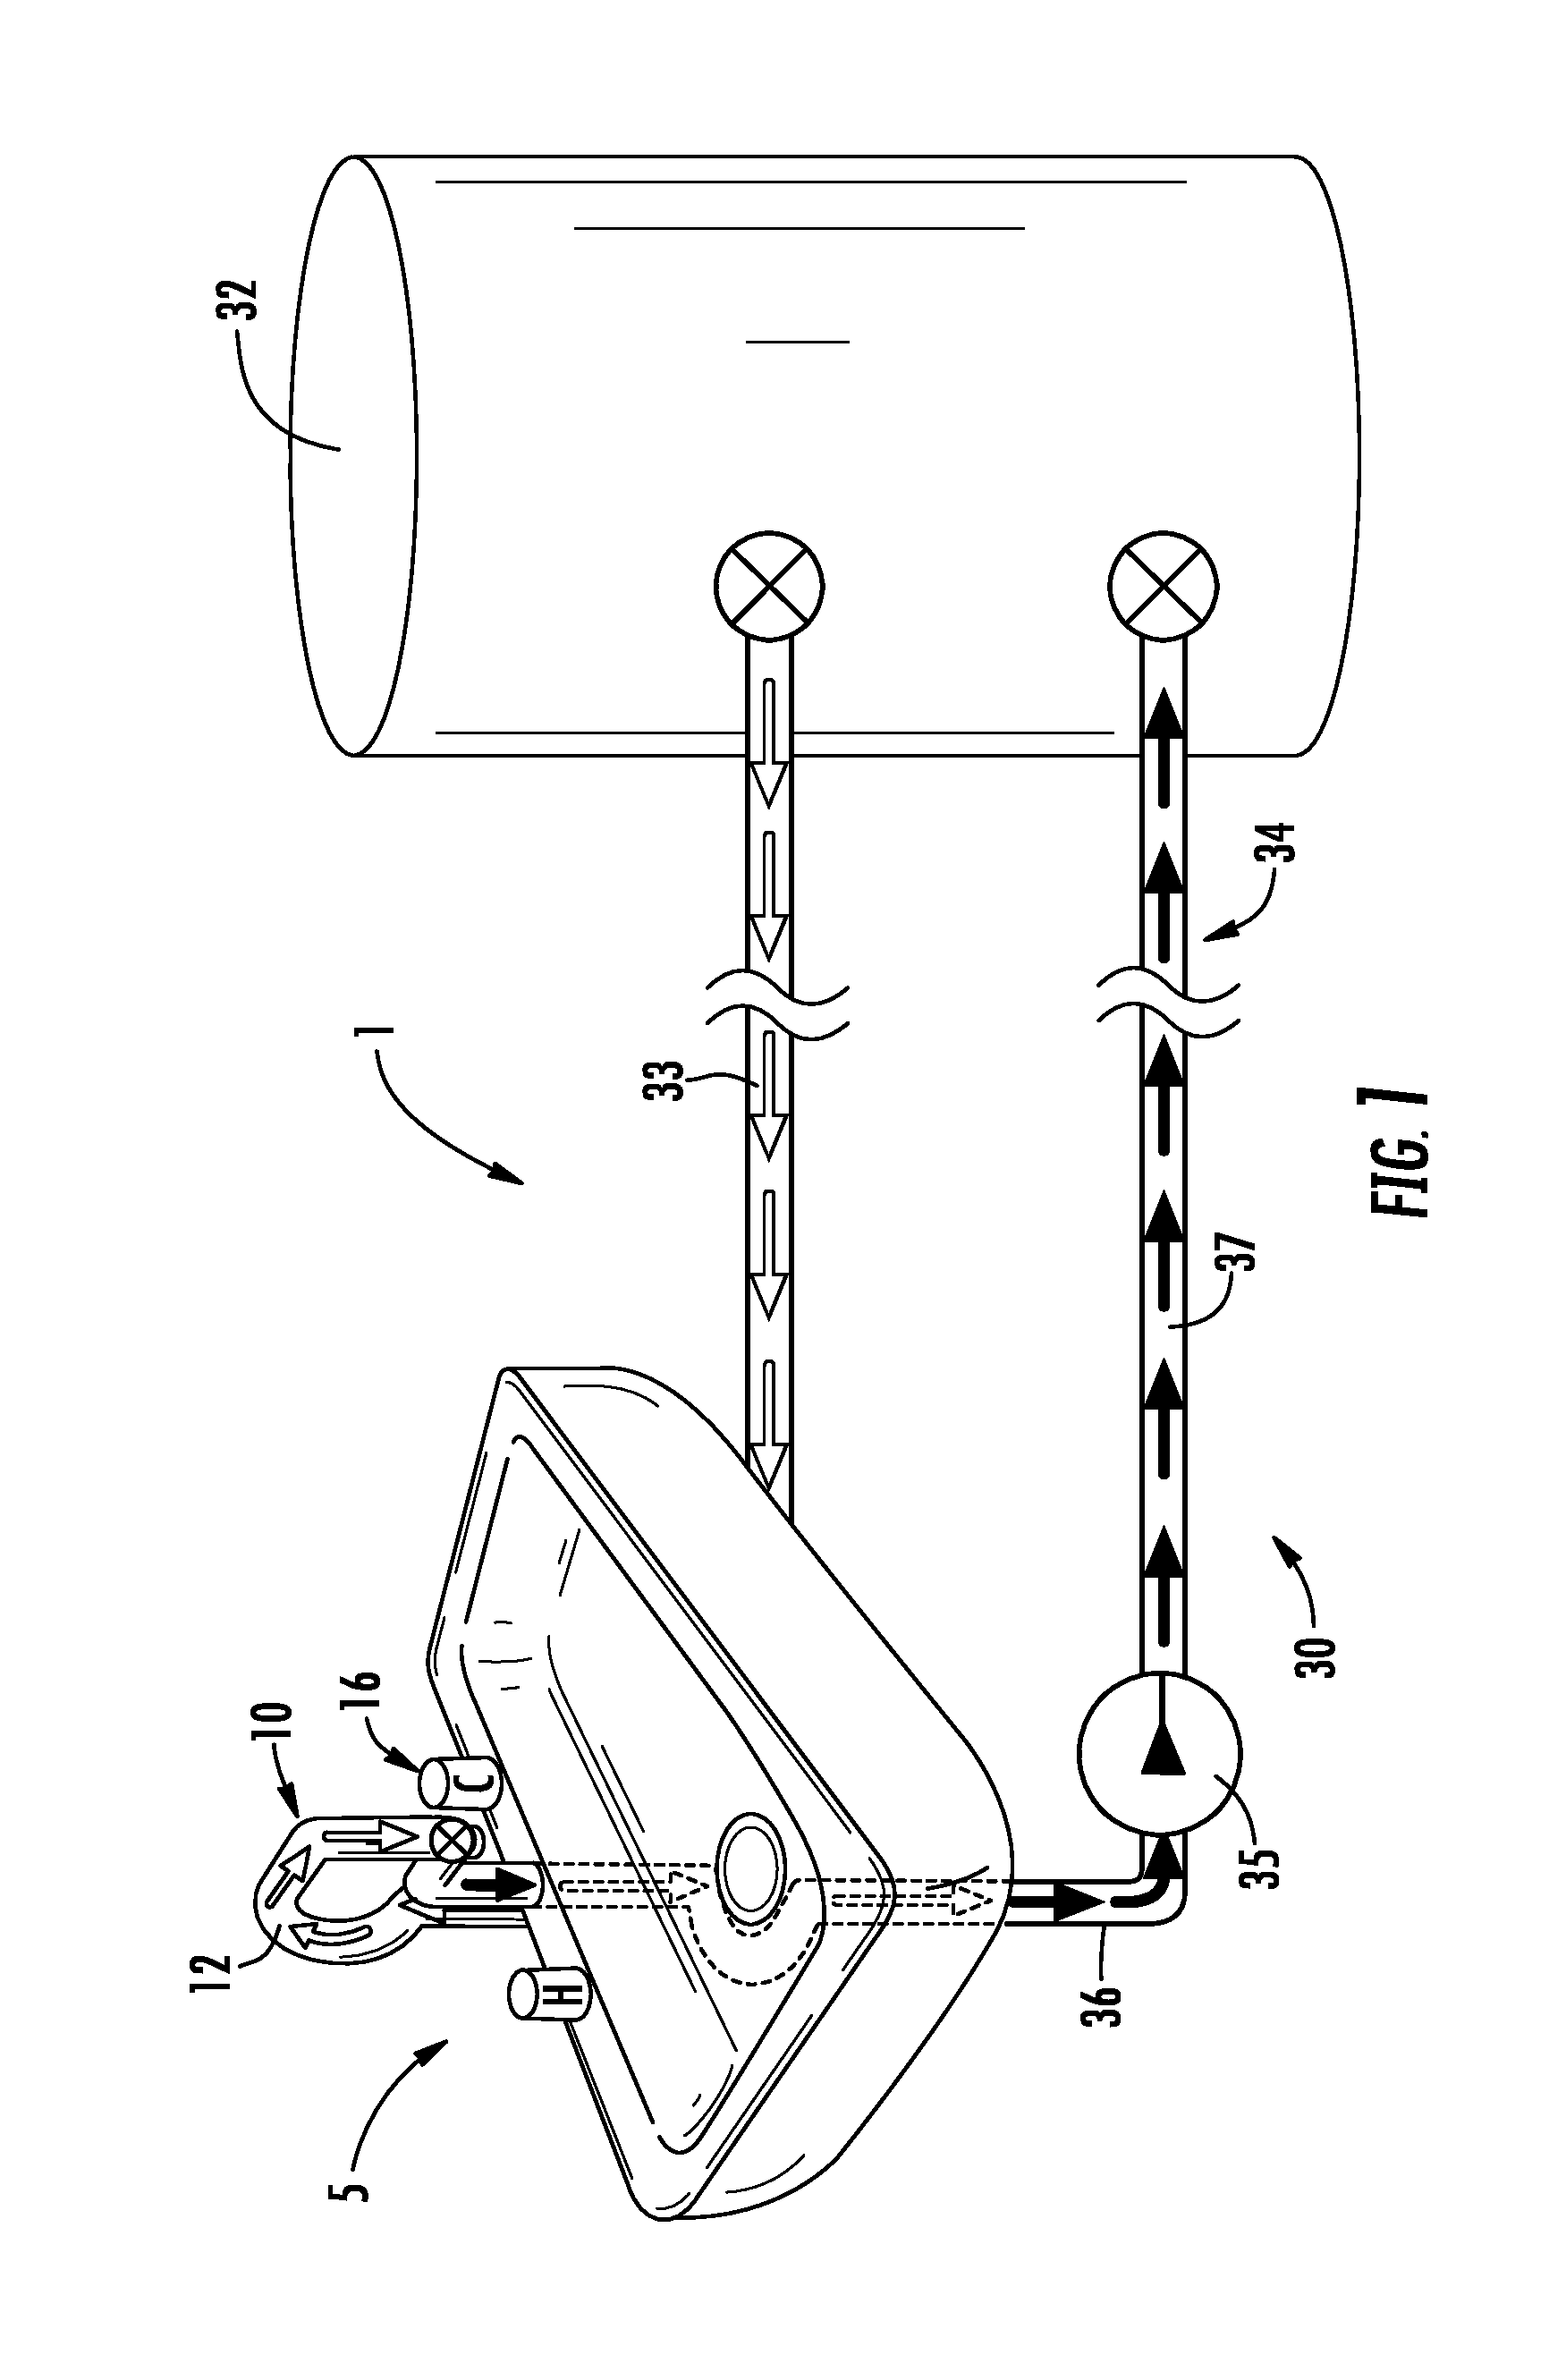 Water conservation systems and methods of using the same